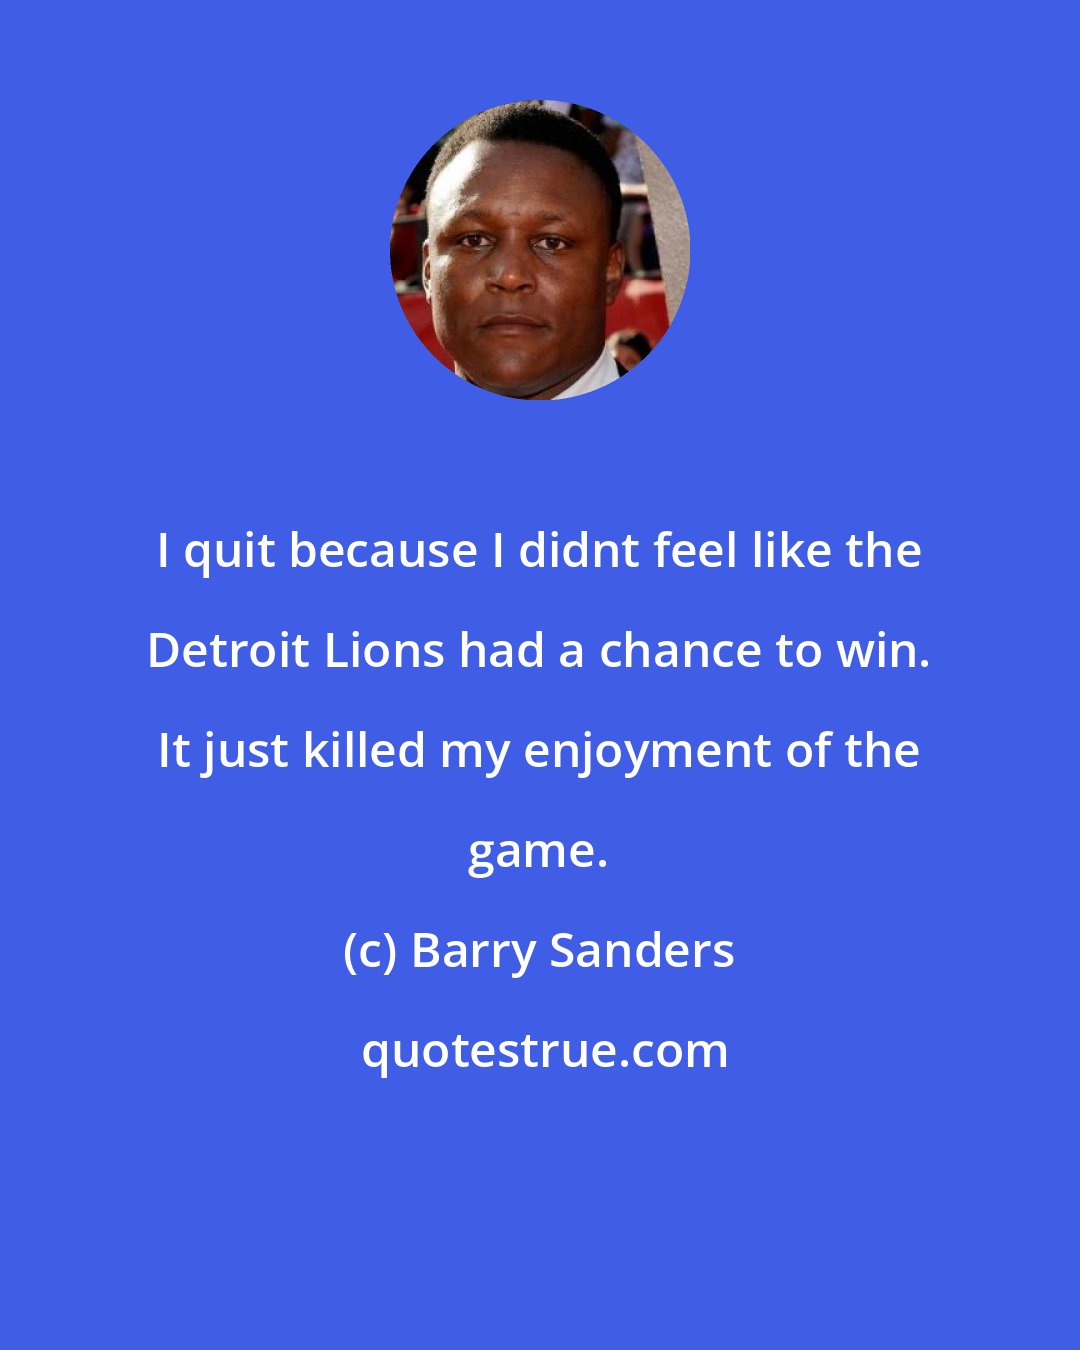 Barry Sanders: I quit because I didnt feel like the Detroit Lions had a chance to win. It just killed my enjoyment of the game.